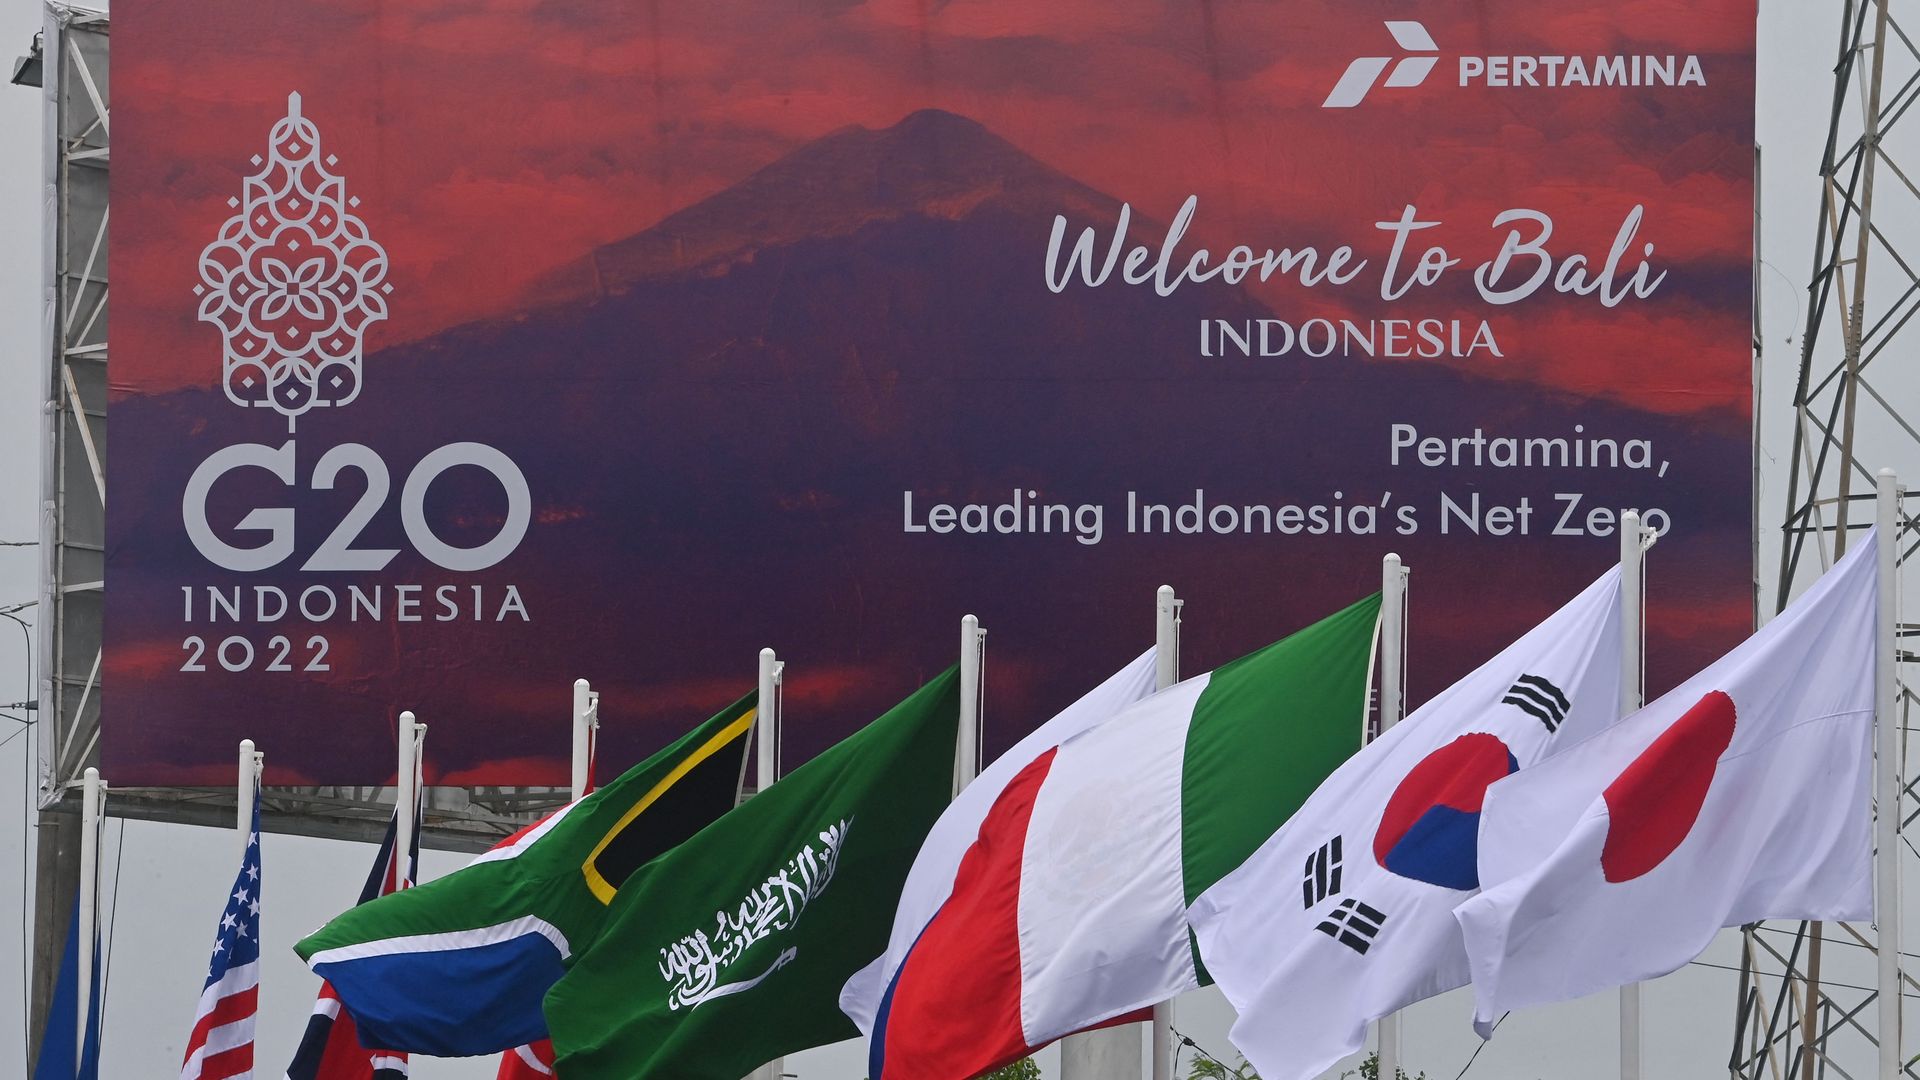 A sign for the G20 Summit in Bali, Indonesia.